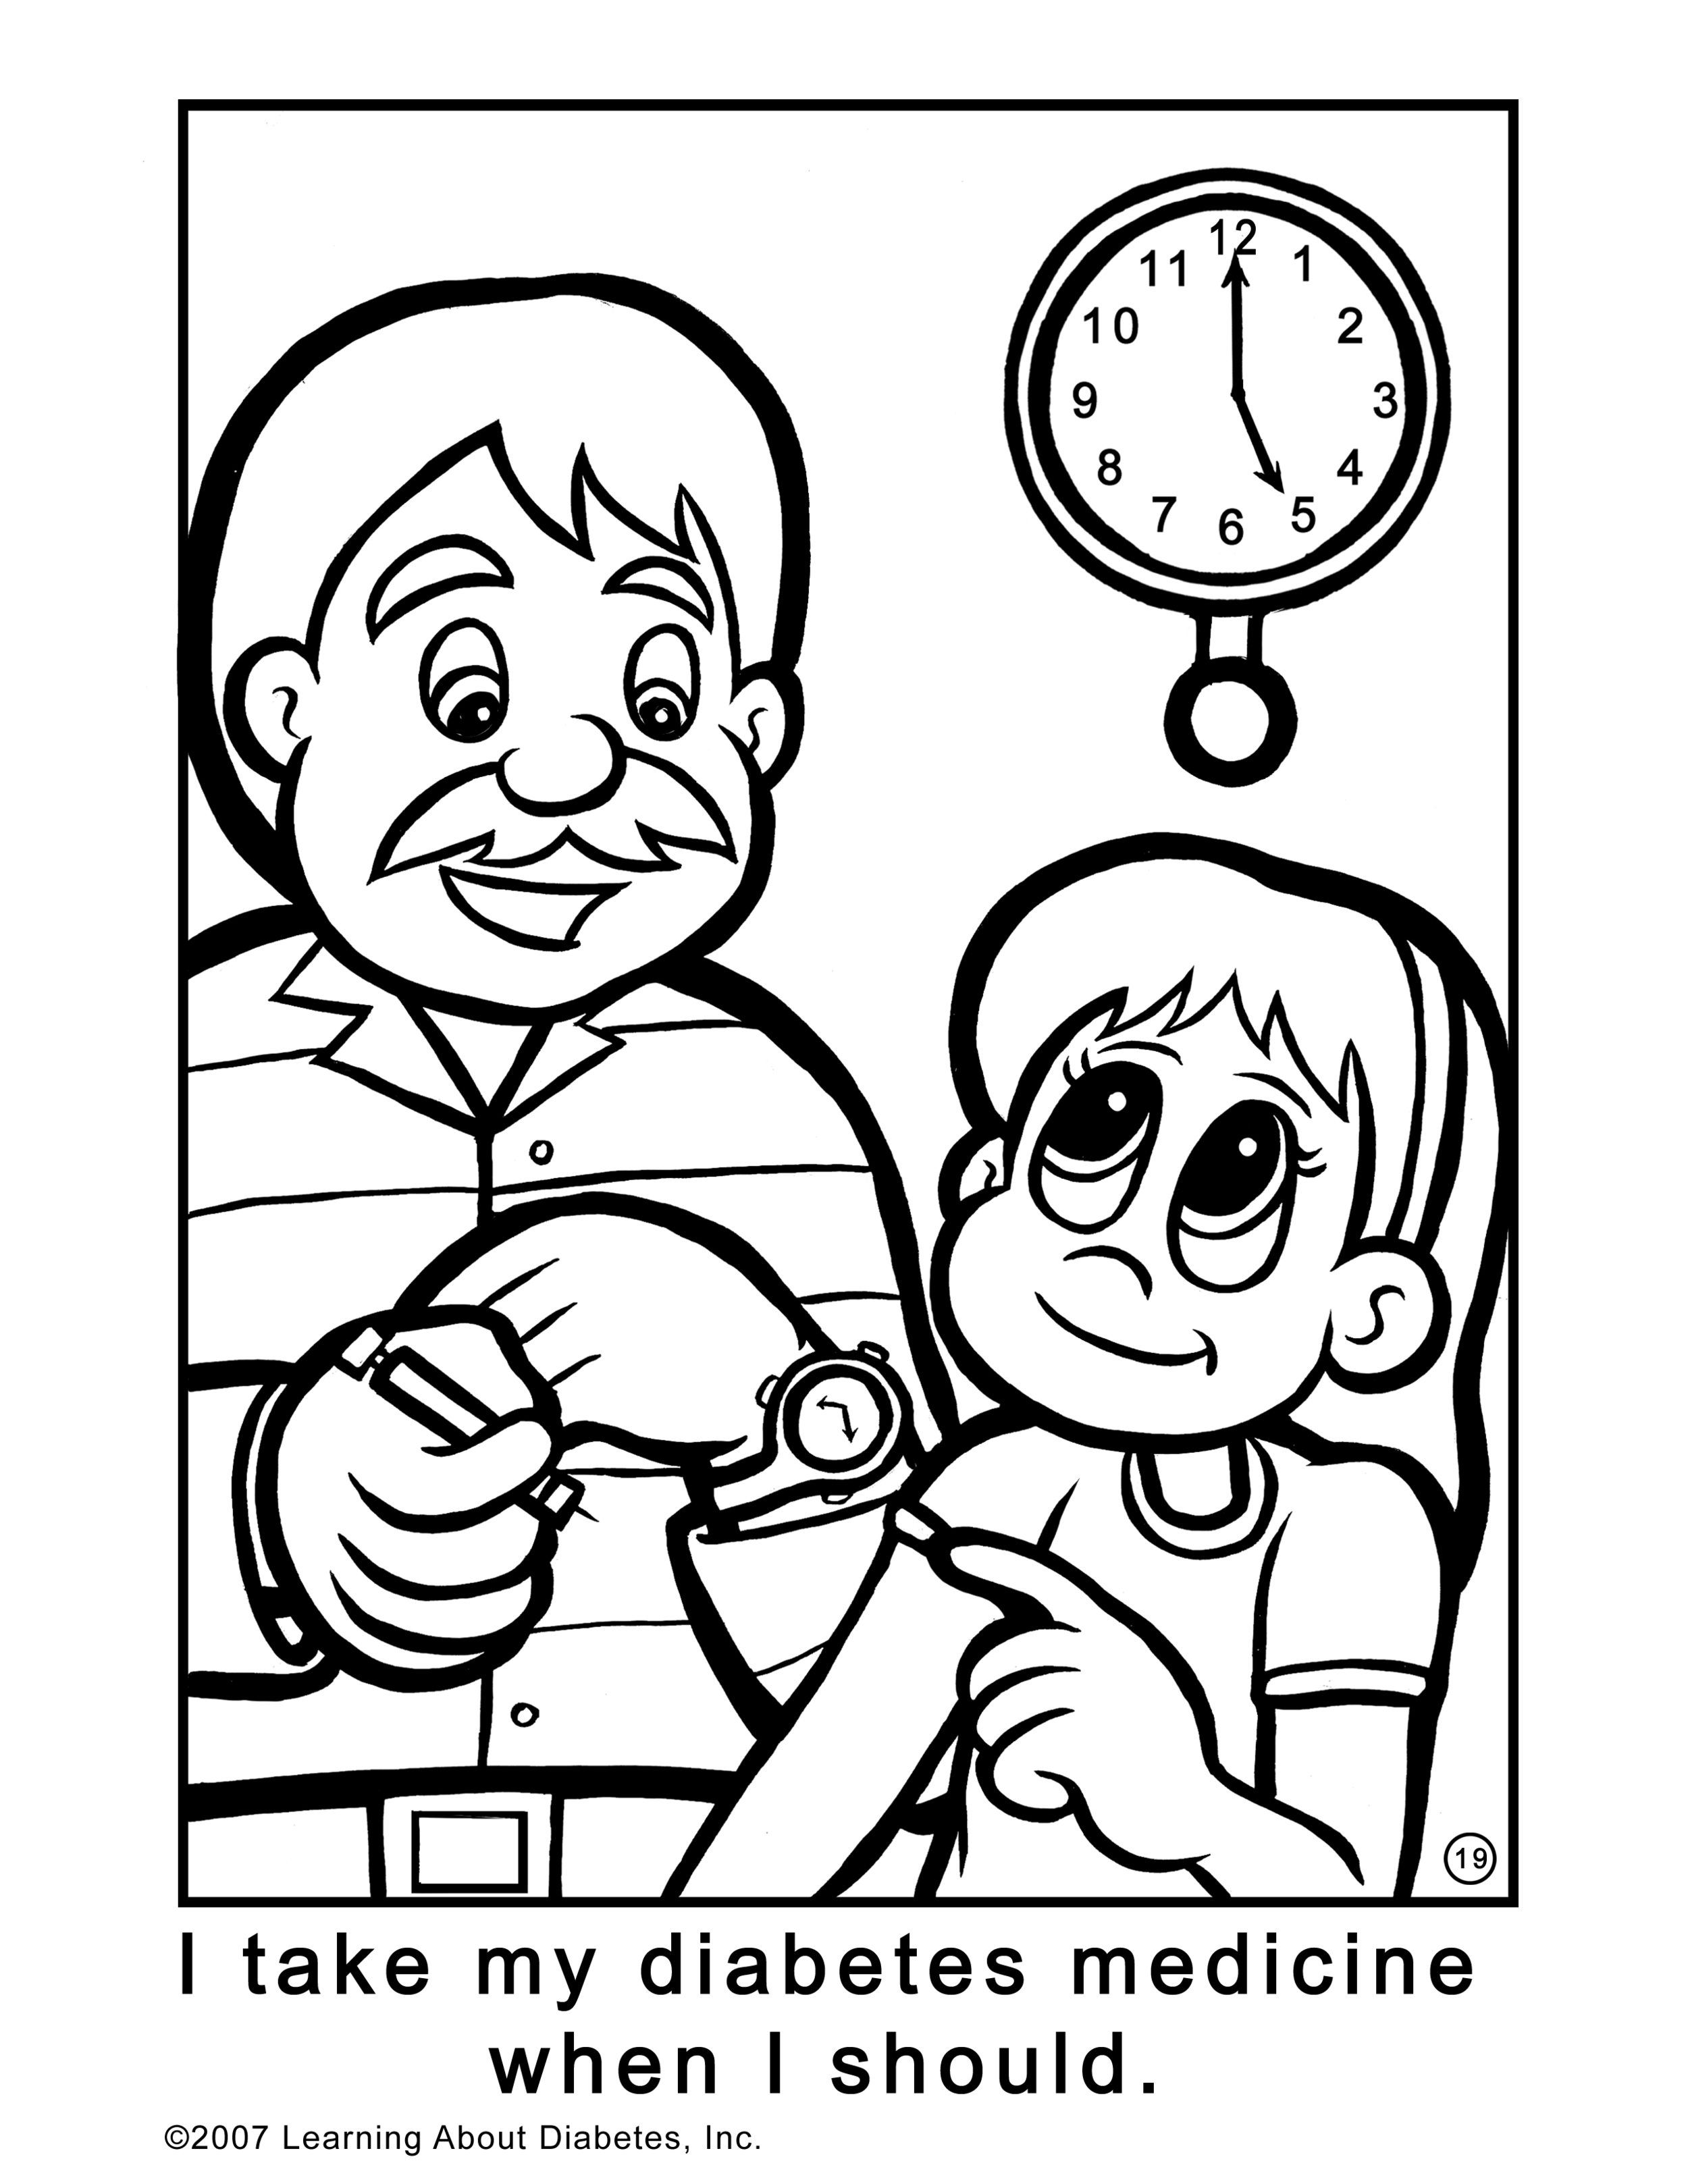 Coloring Page for "Welcome To My World!"